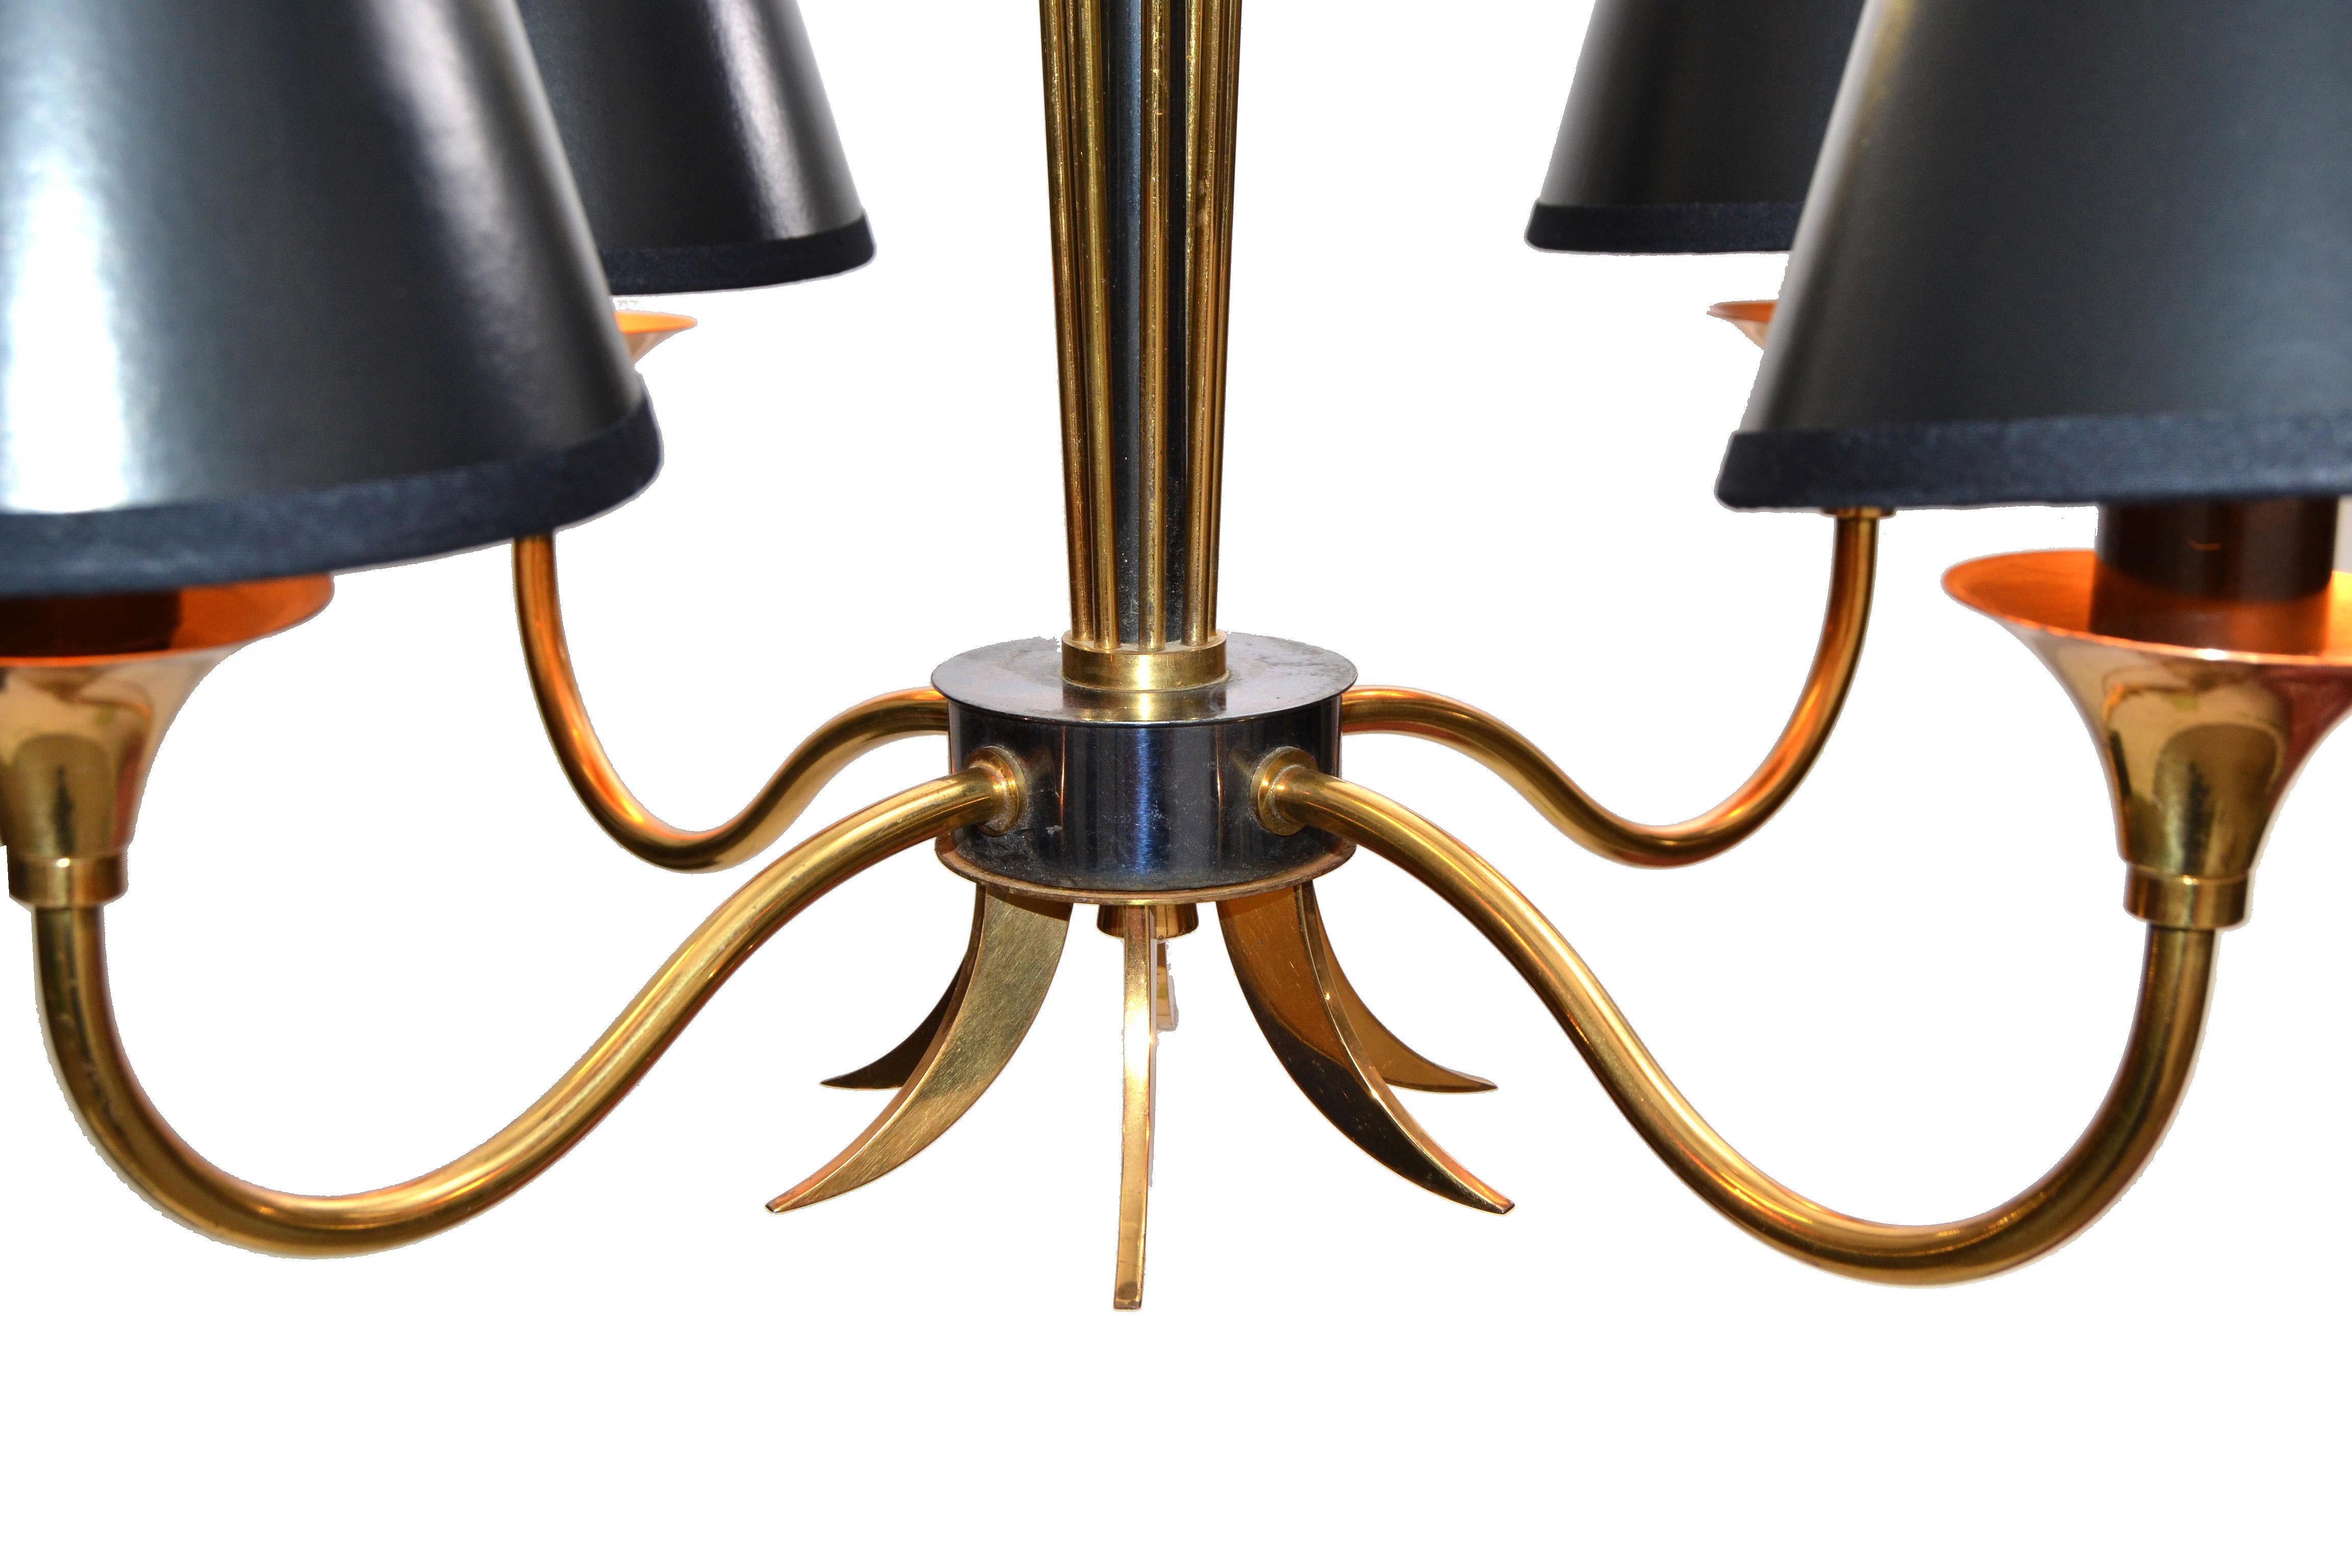 Mid-20th Century Maison Lunel Four-Light Chandelier Brass and Gun Metal French Mid-Century Modern For Sale